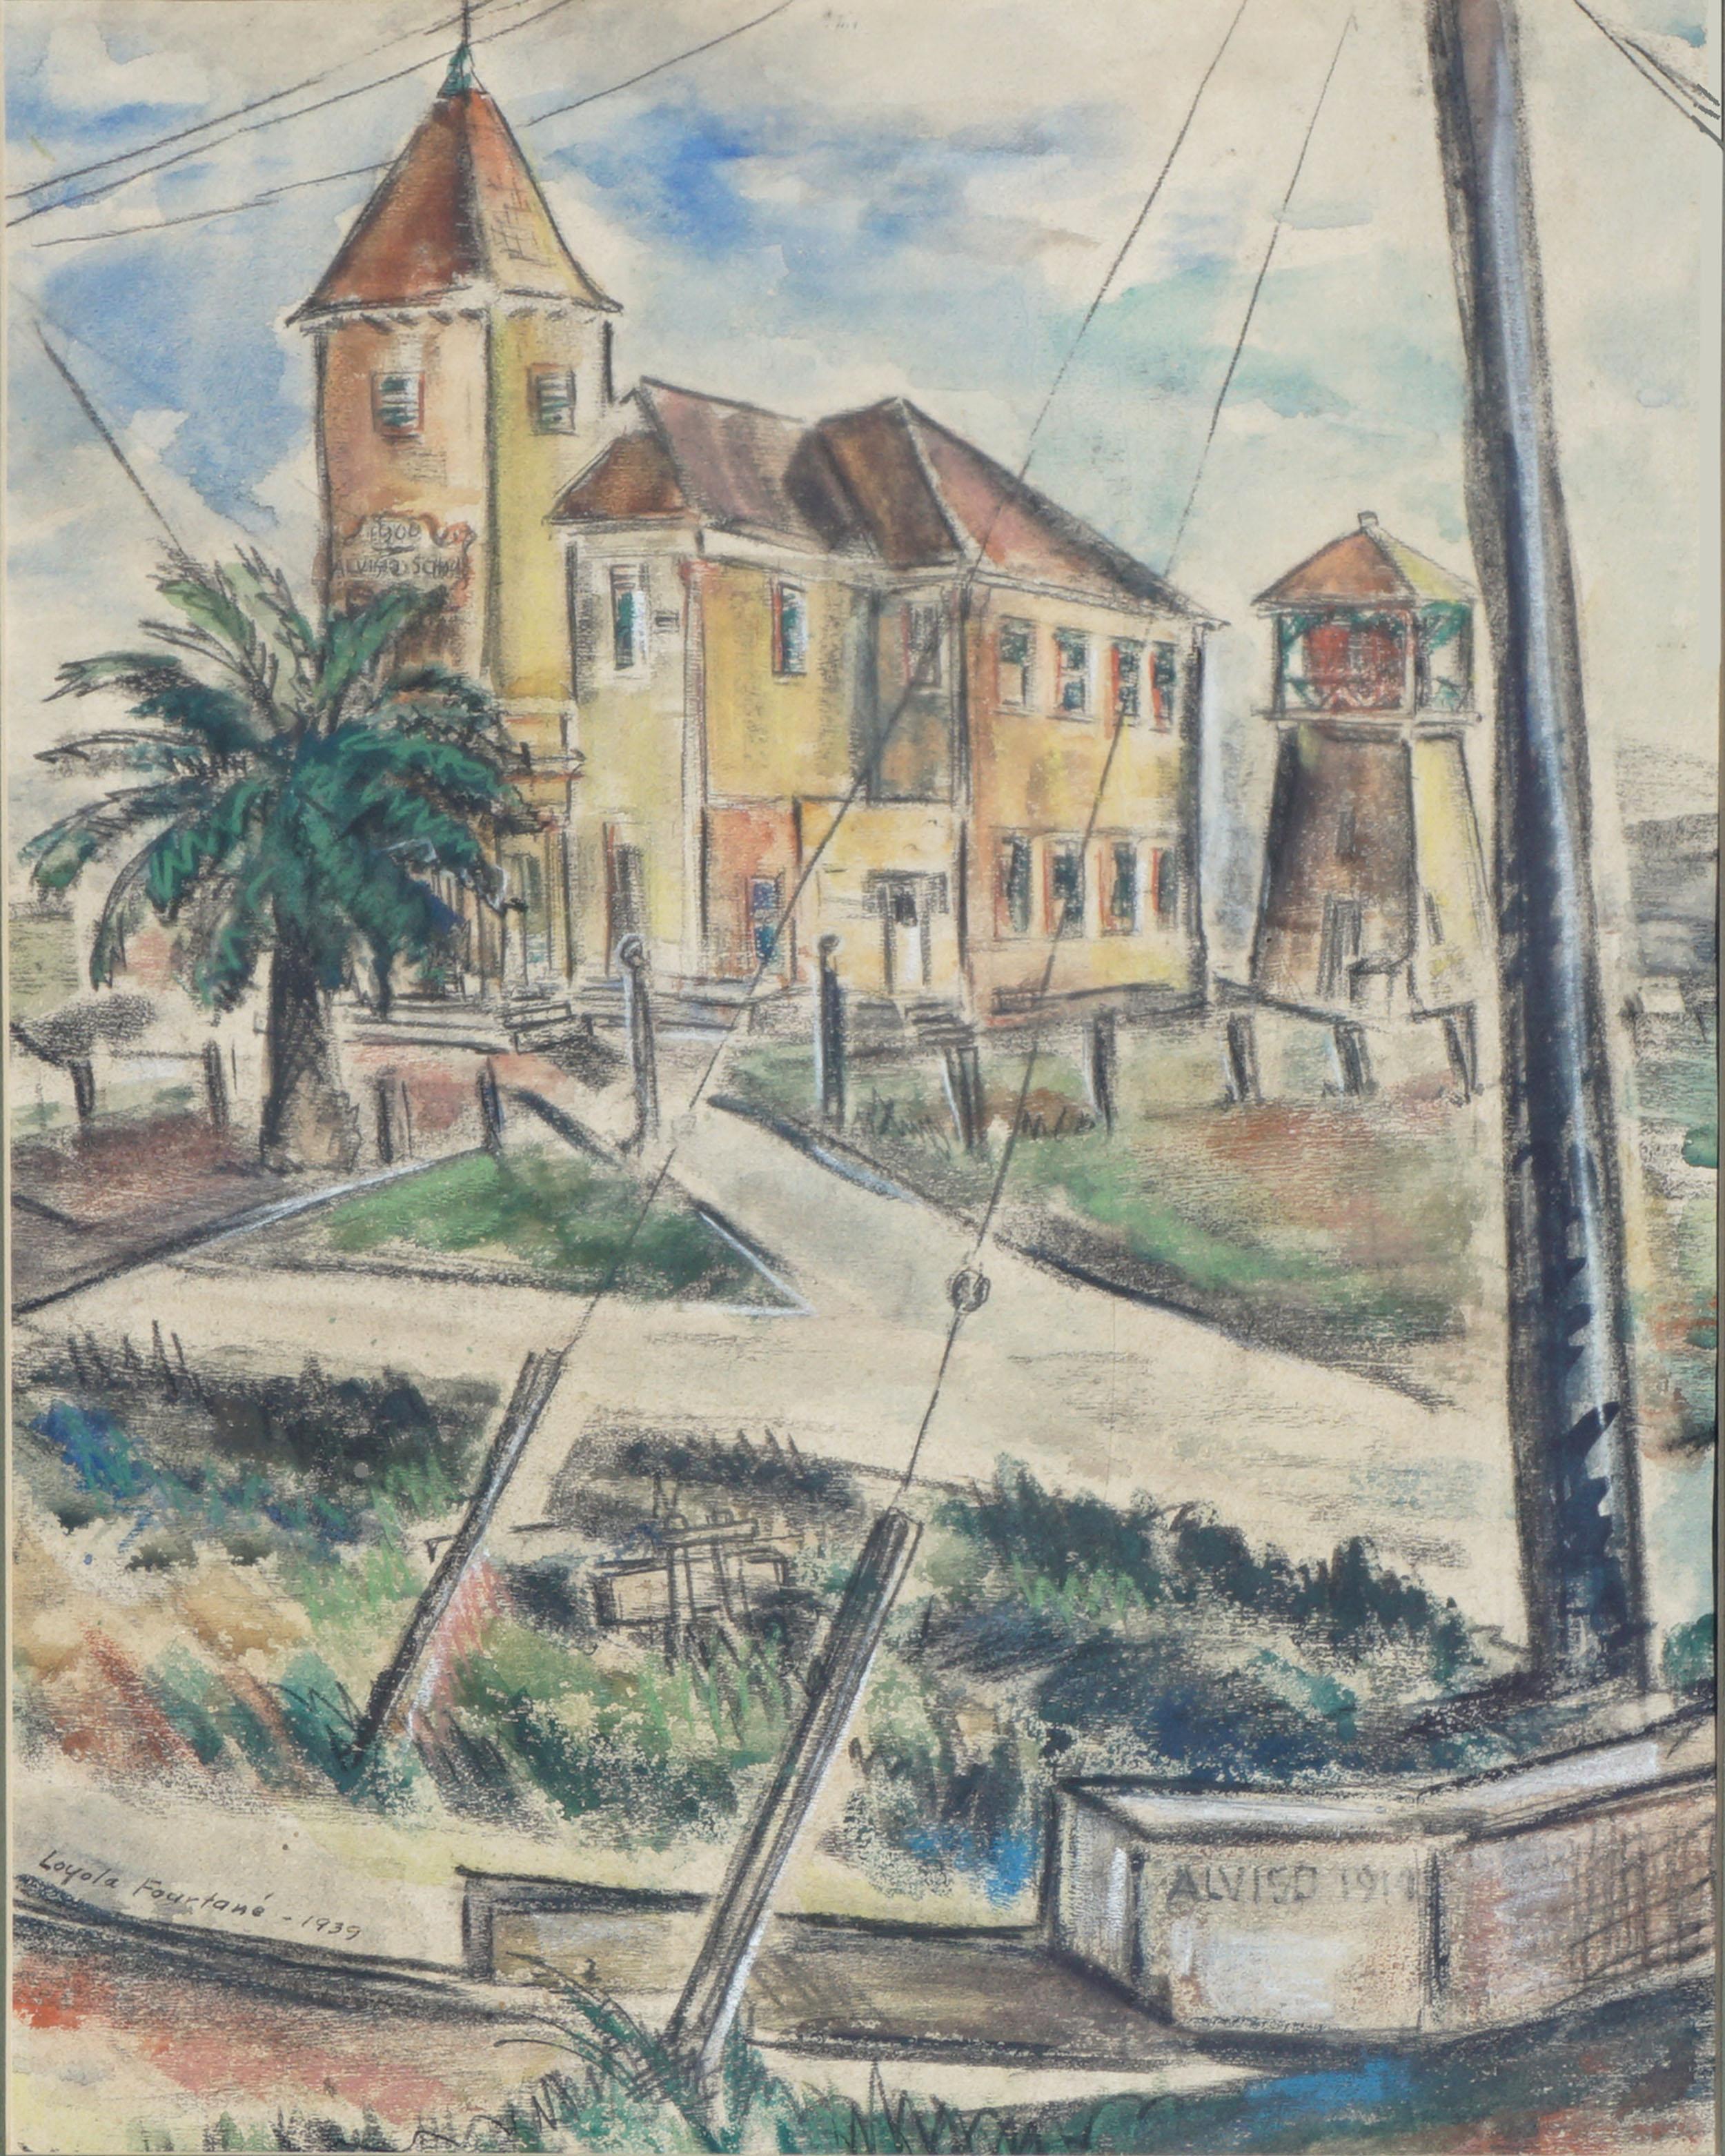 Alviso Harbor and School Landscape - Painting by Loyola Fourtane